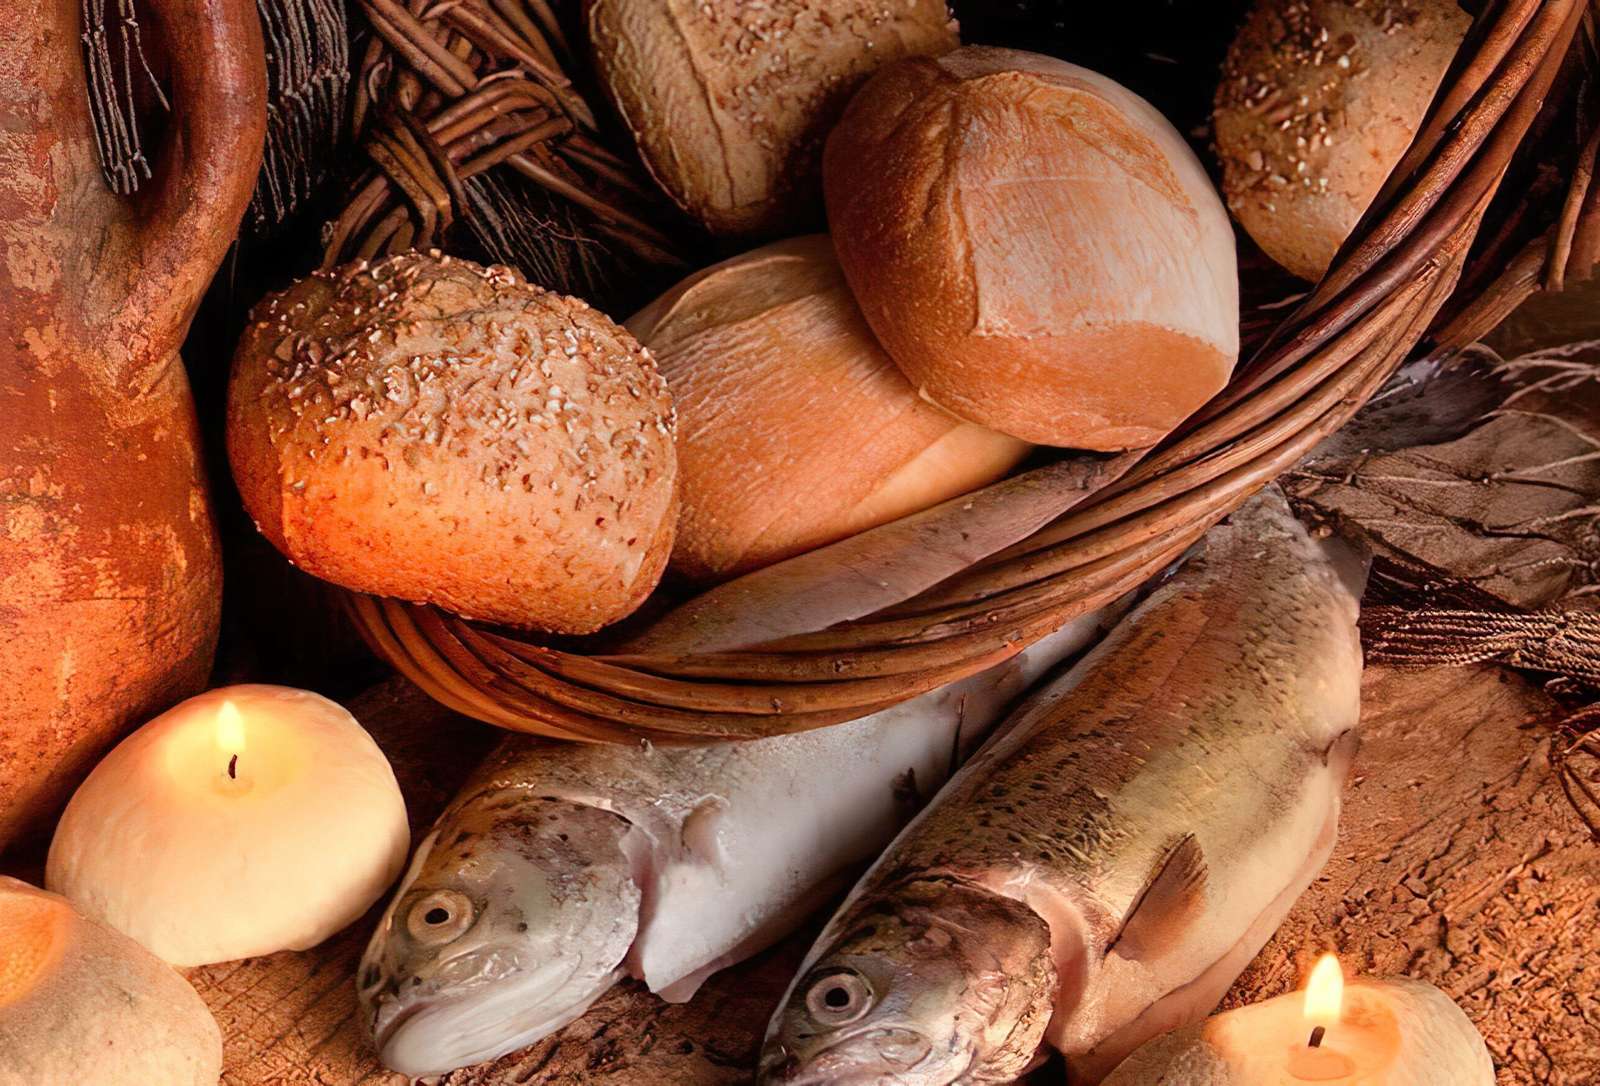 bread and fish puzzle online from photo